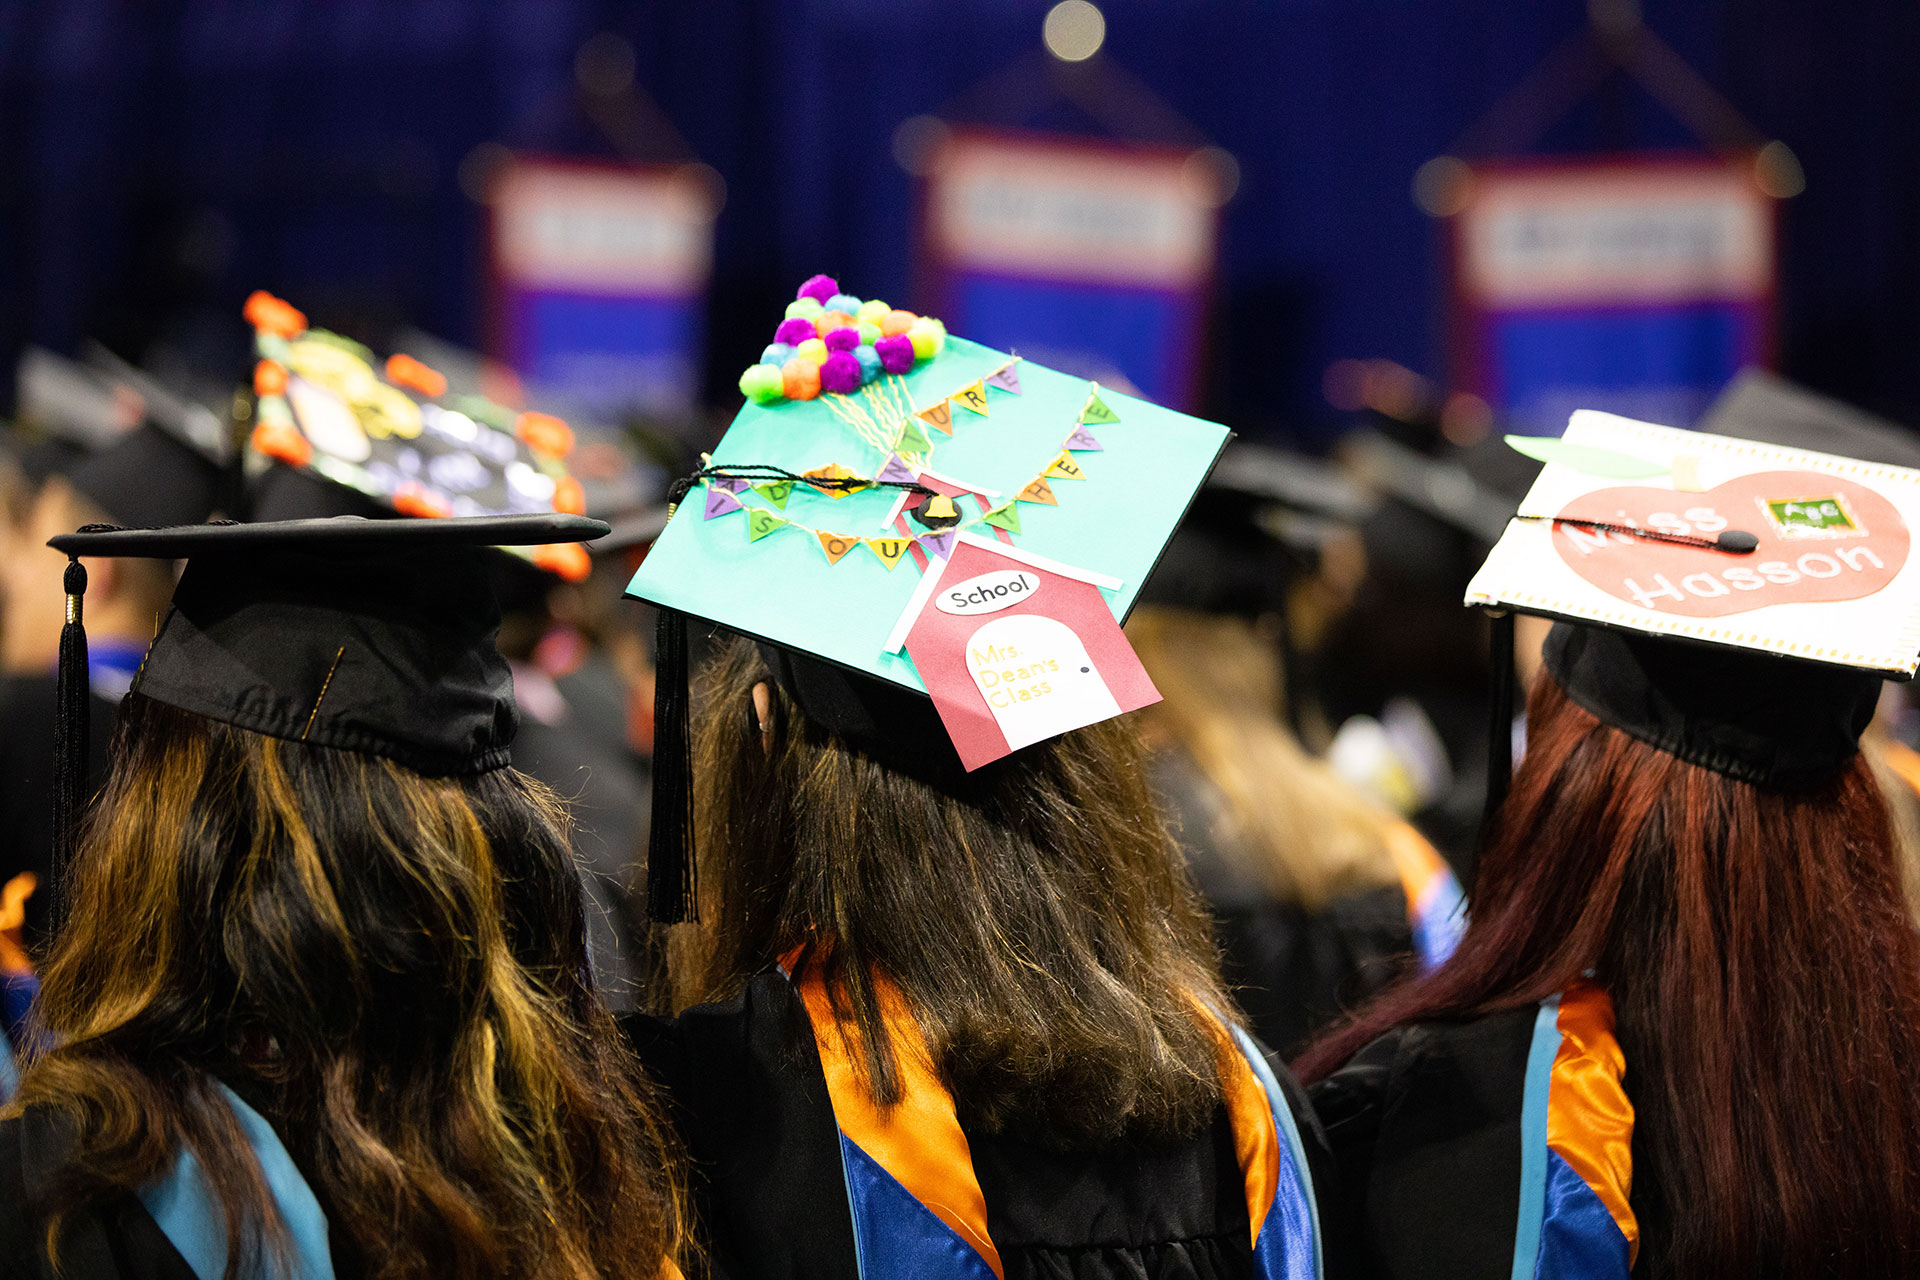 A photo from the back of three students in caps and gowns at commencement.